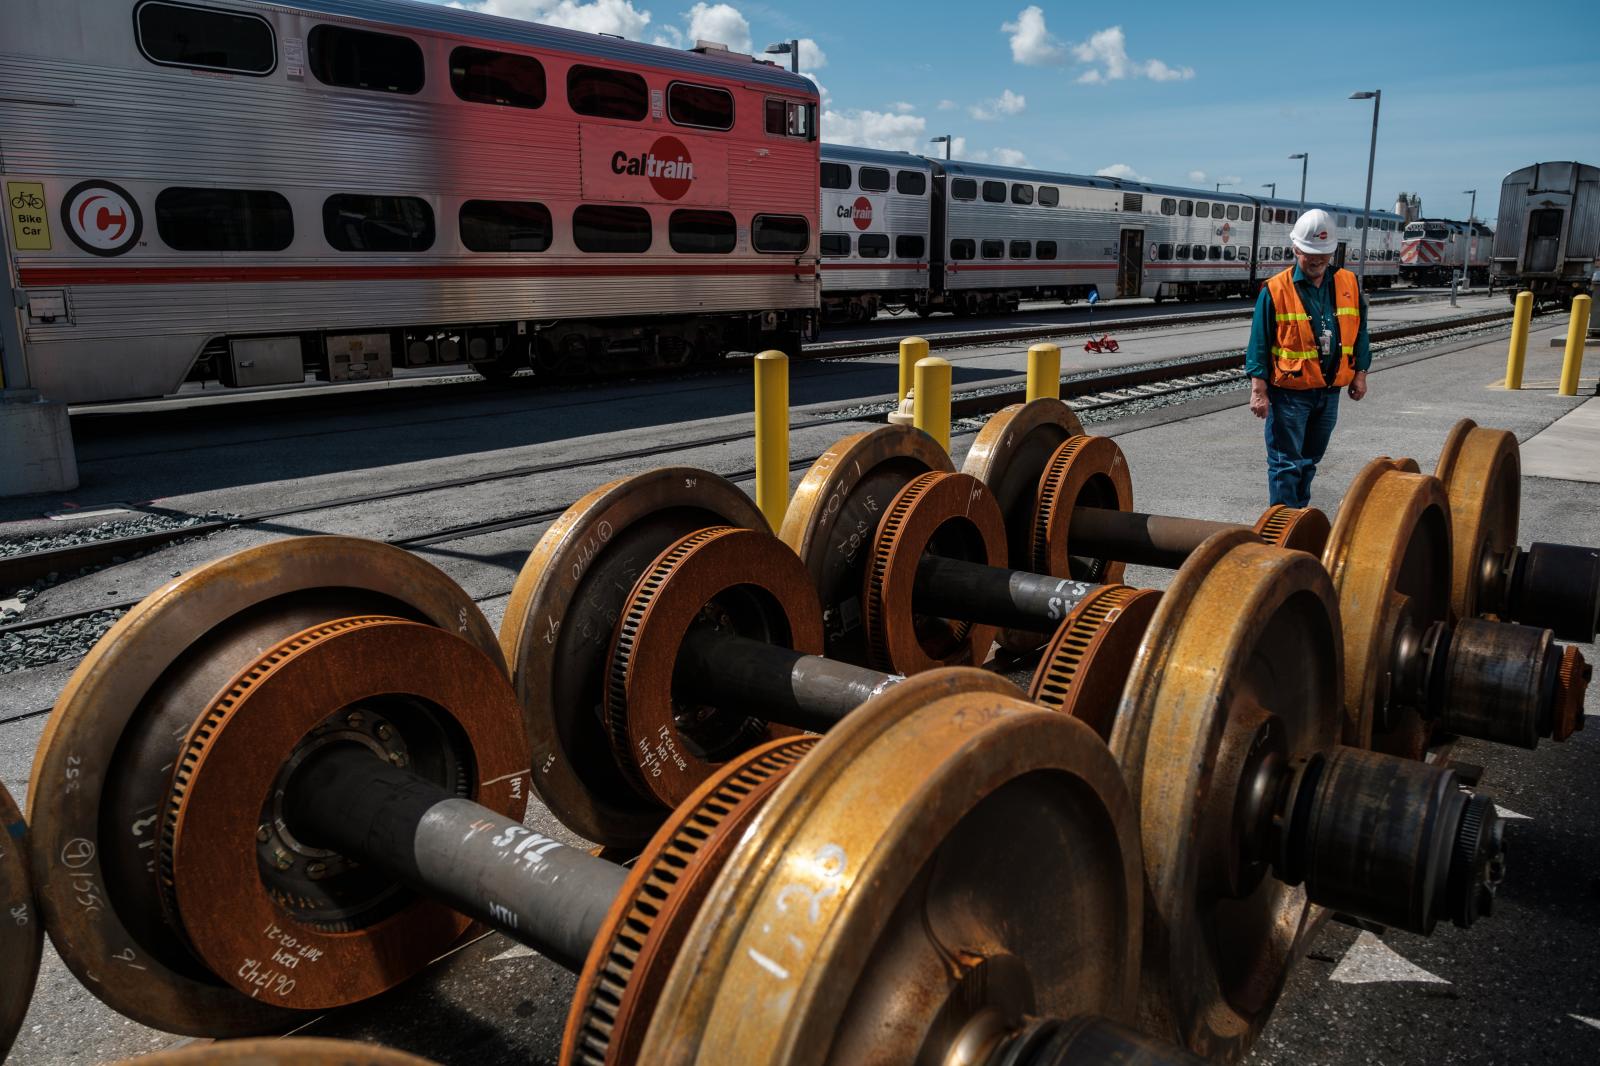 Image from A Day on the Trains - SAN JOSE, CA - MARCH 27: Train wheels can bee seen at the...